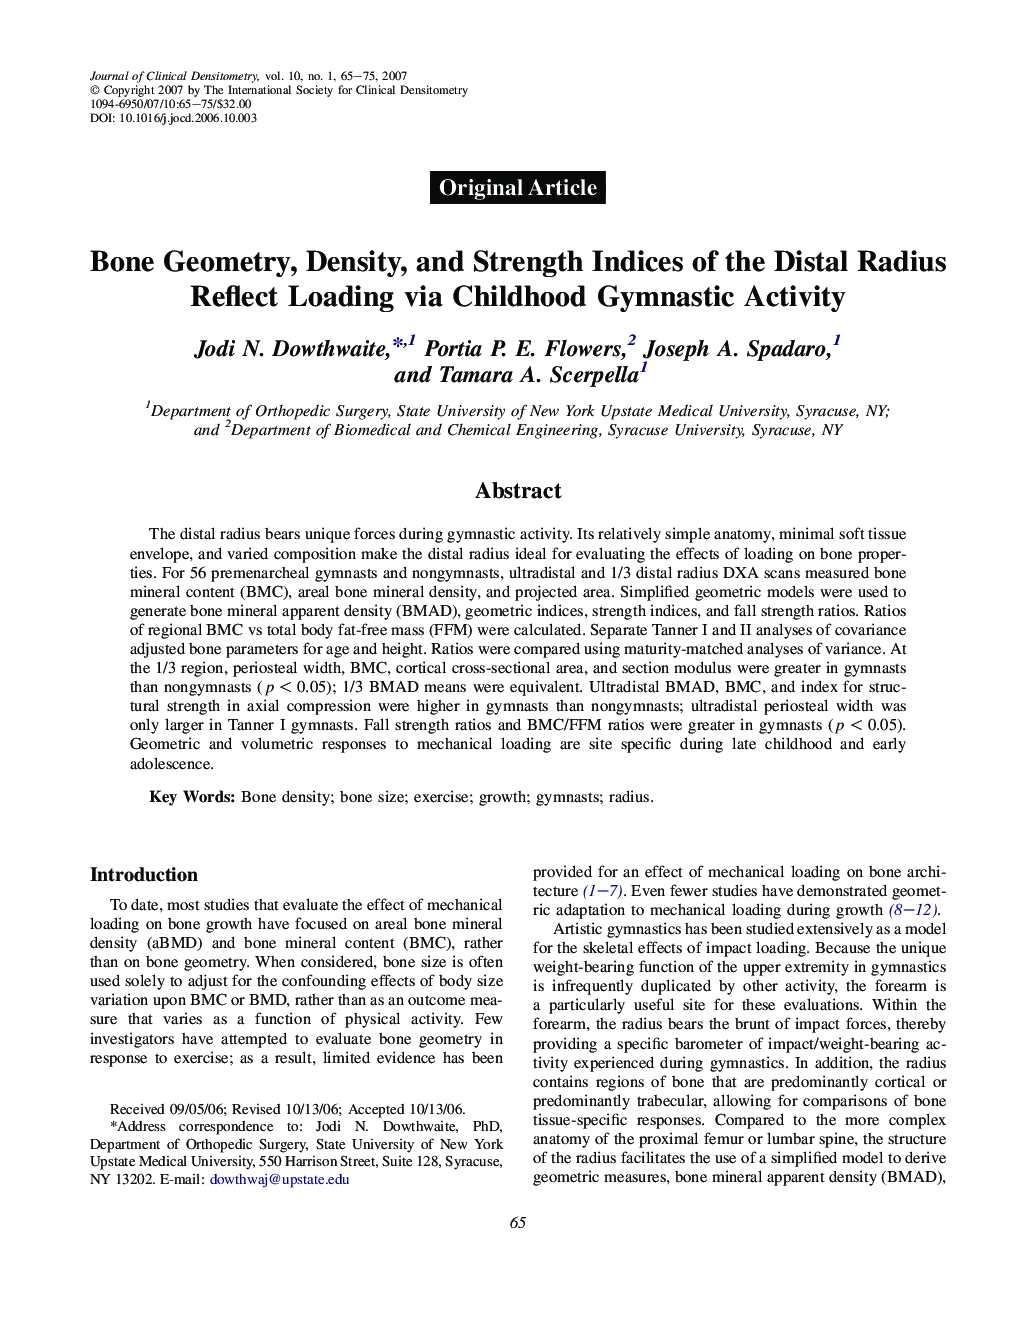 Bone Geometry, Density, and Strength Indices of the Distal Radius Reflect Loading via Childhood Gymnastic Activity